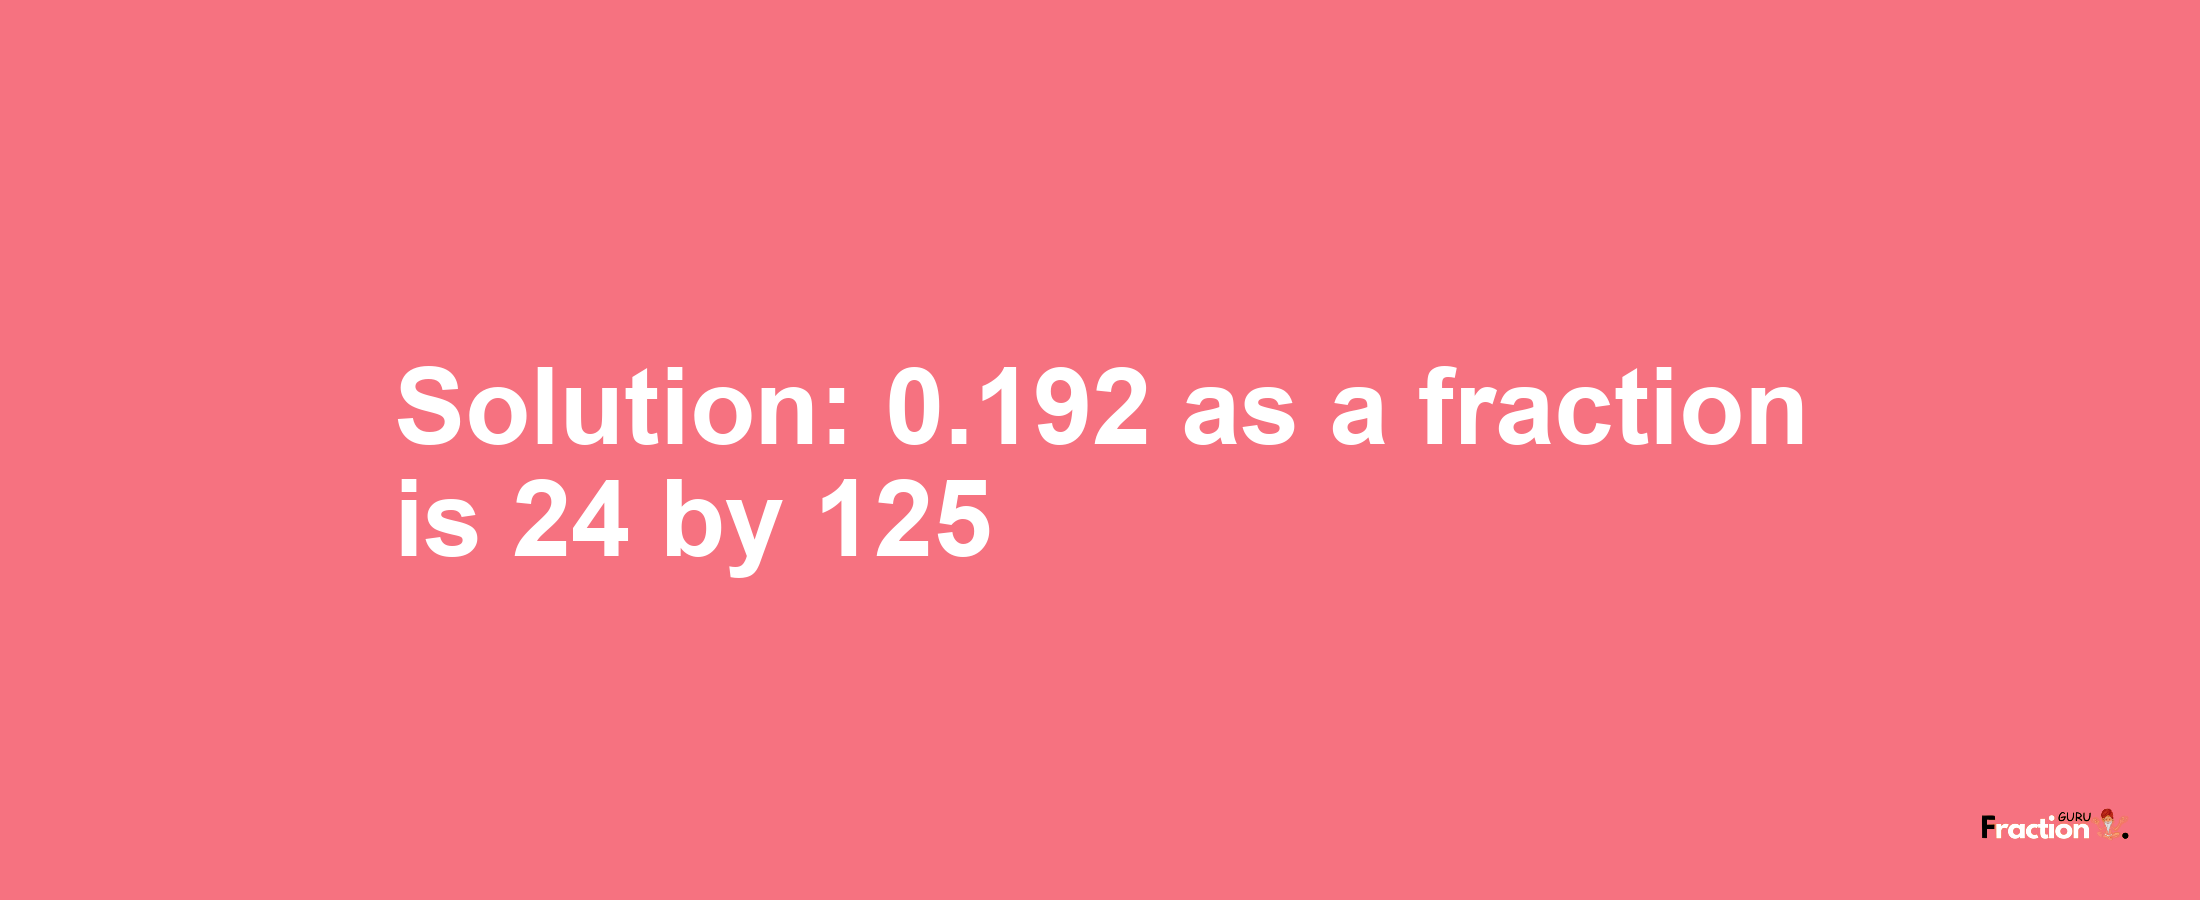 Solution:0.192 as a fraction is 24/125